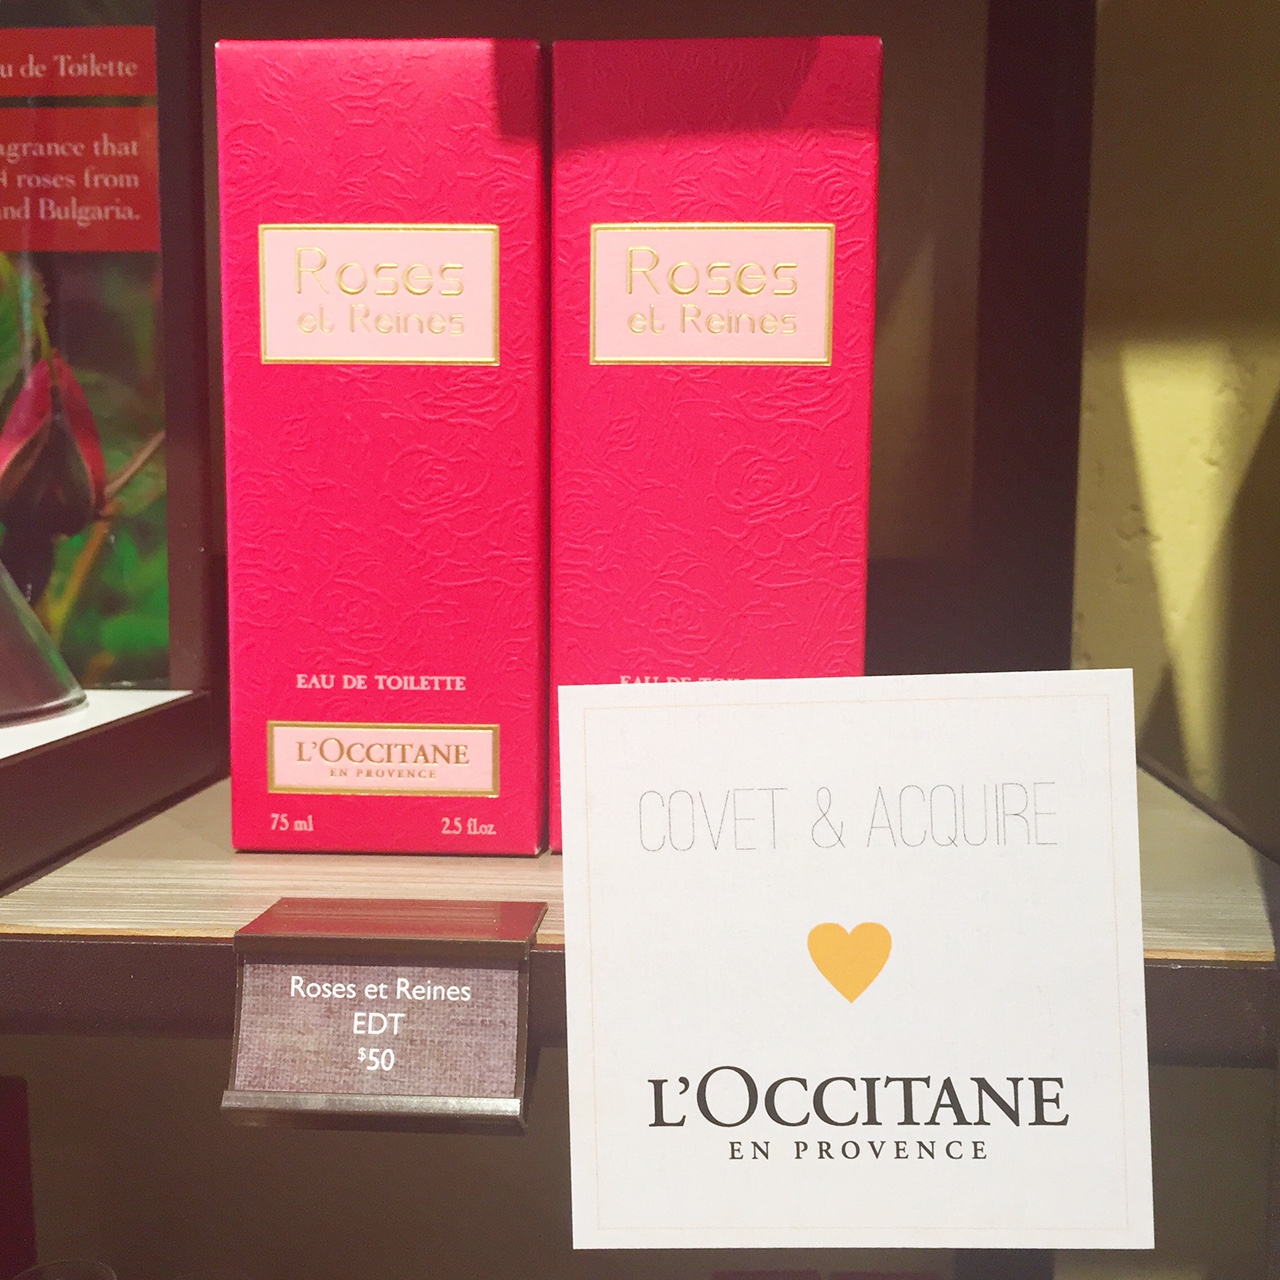 L'Occitane Granville Street event hosted by Vancouver blogger Covet and Acquire